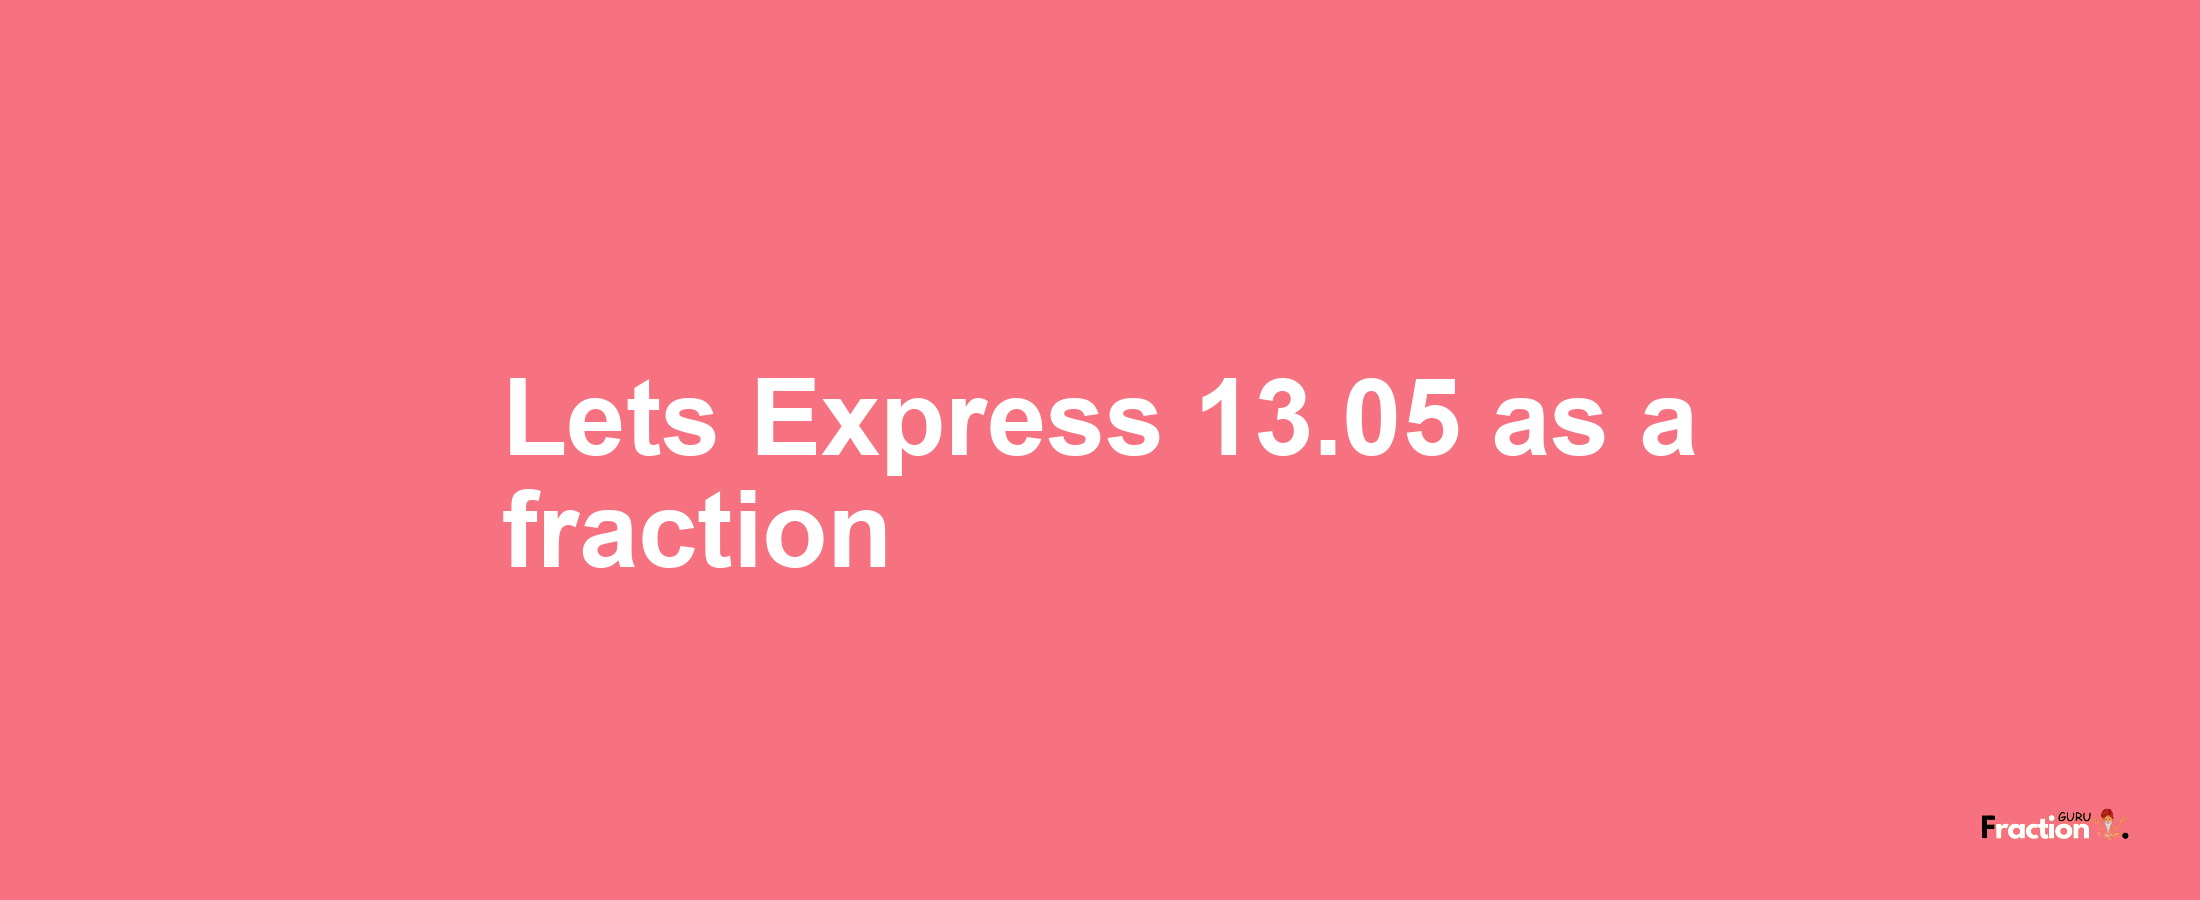 Lets Express 13.05 as afraction